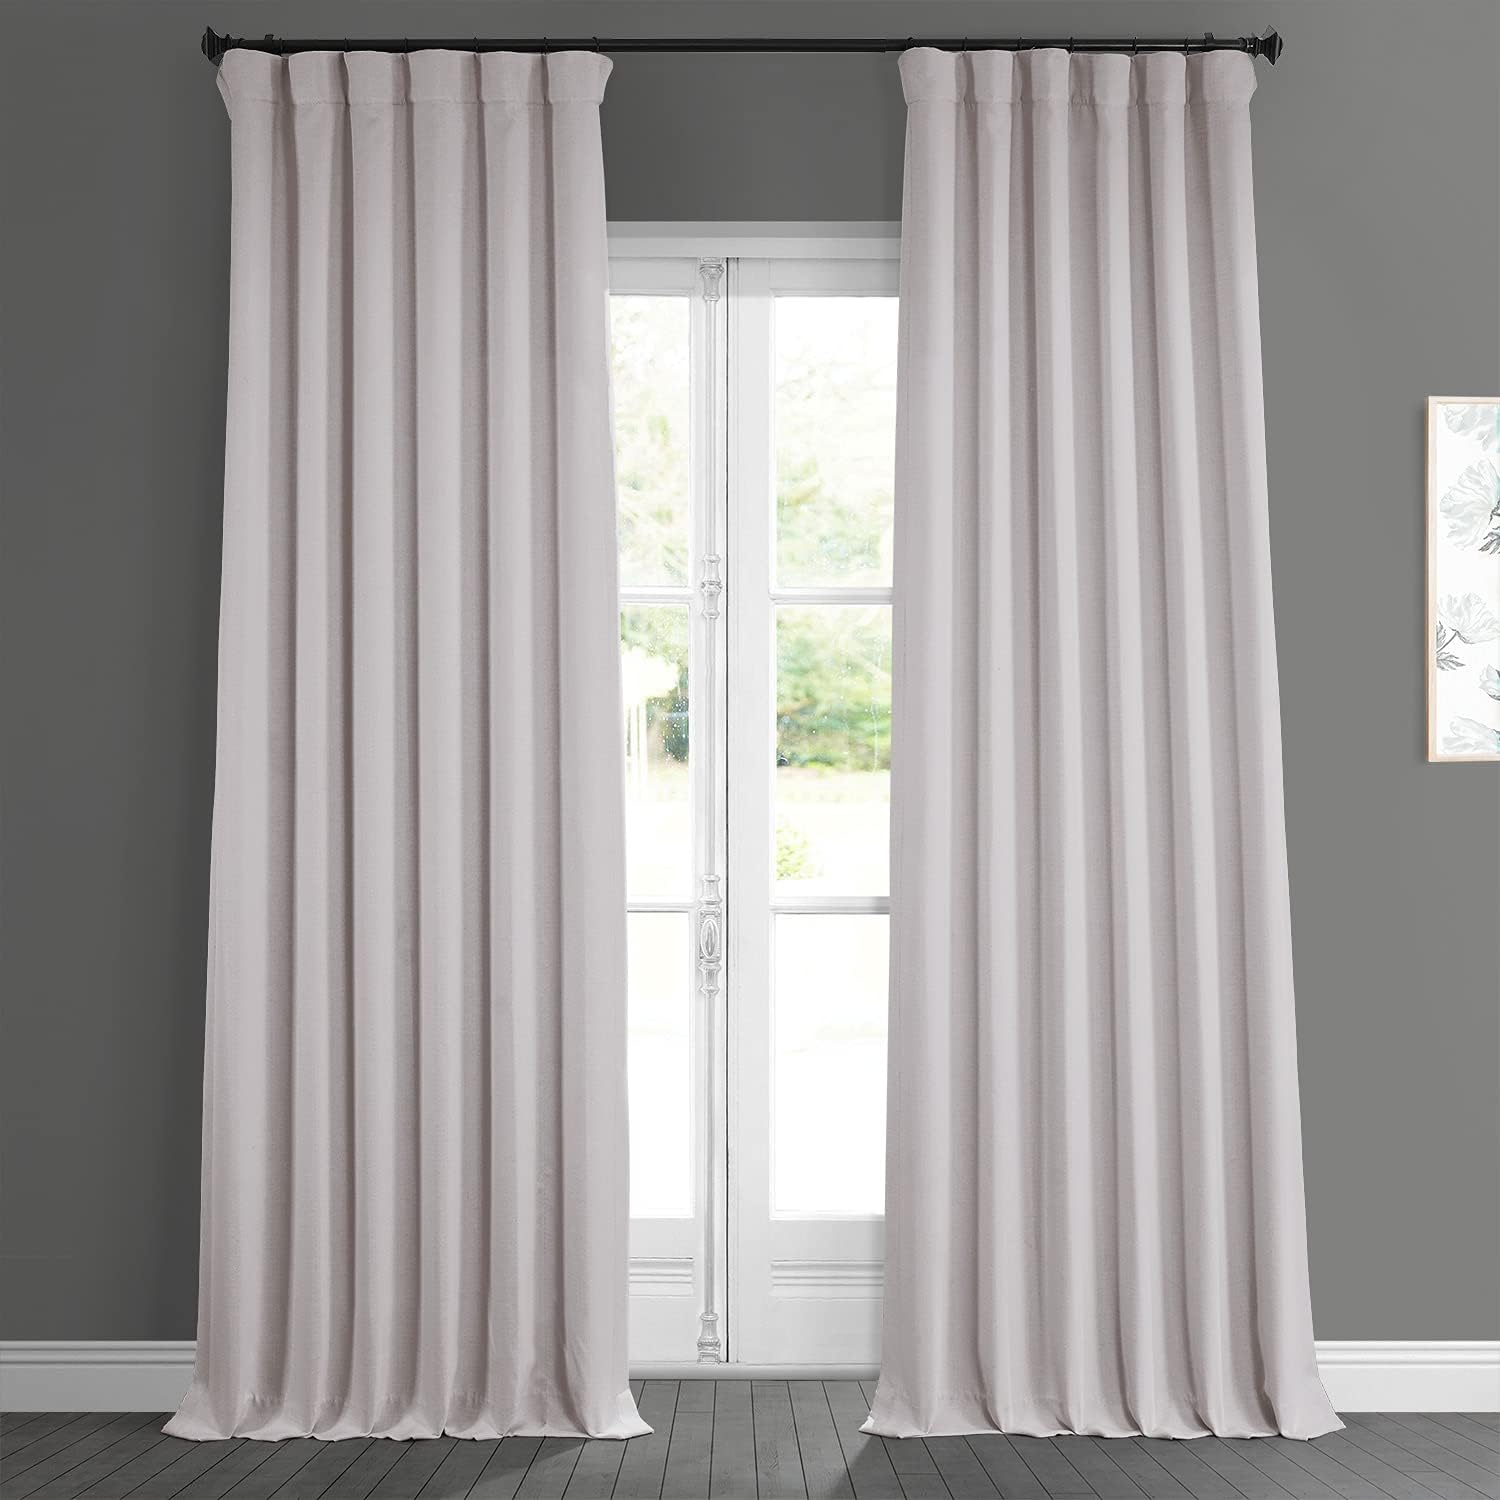 gold scenery curtains 3d blackout curtains for living room bedding room drapes cotinas para sala blackout curtains Шторы HPD Half Price Drapes Faux Linen Room Darkening Curtains, 127x274 см, светло-бежевый